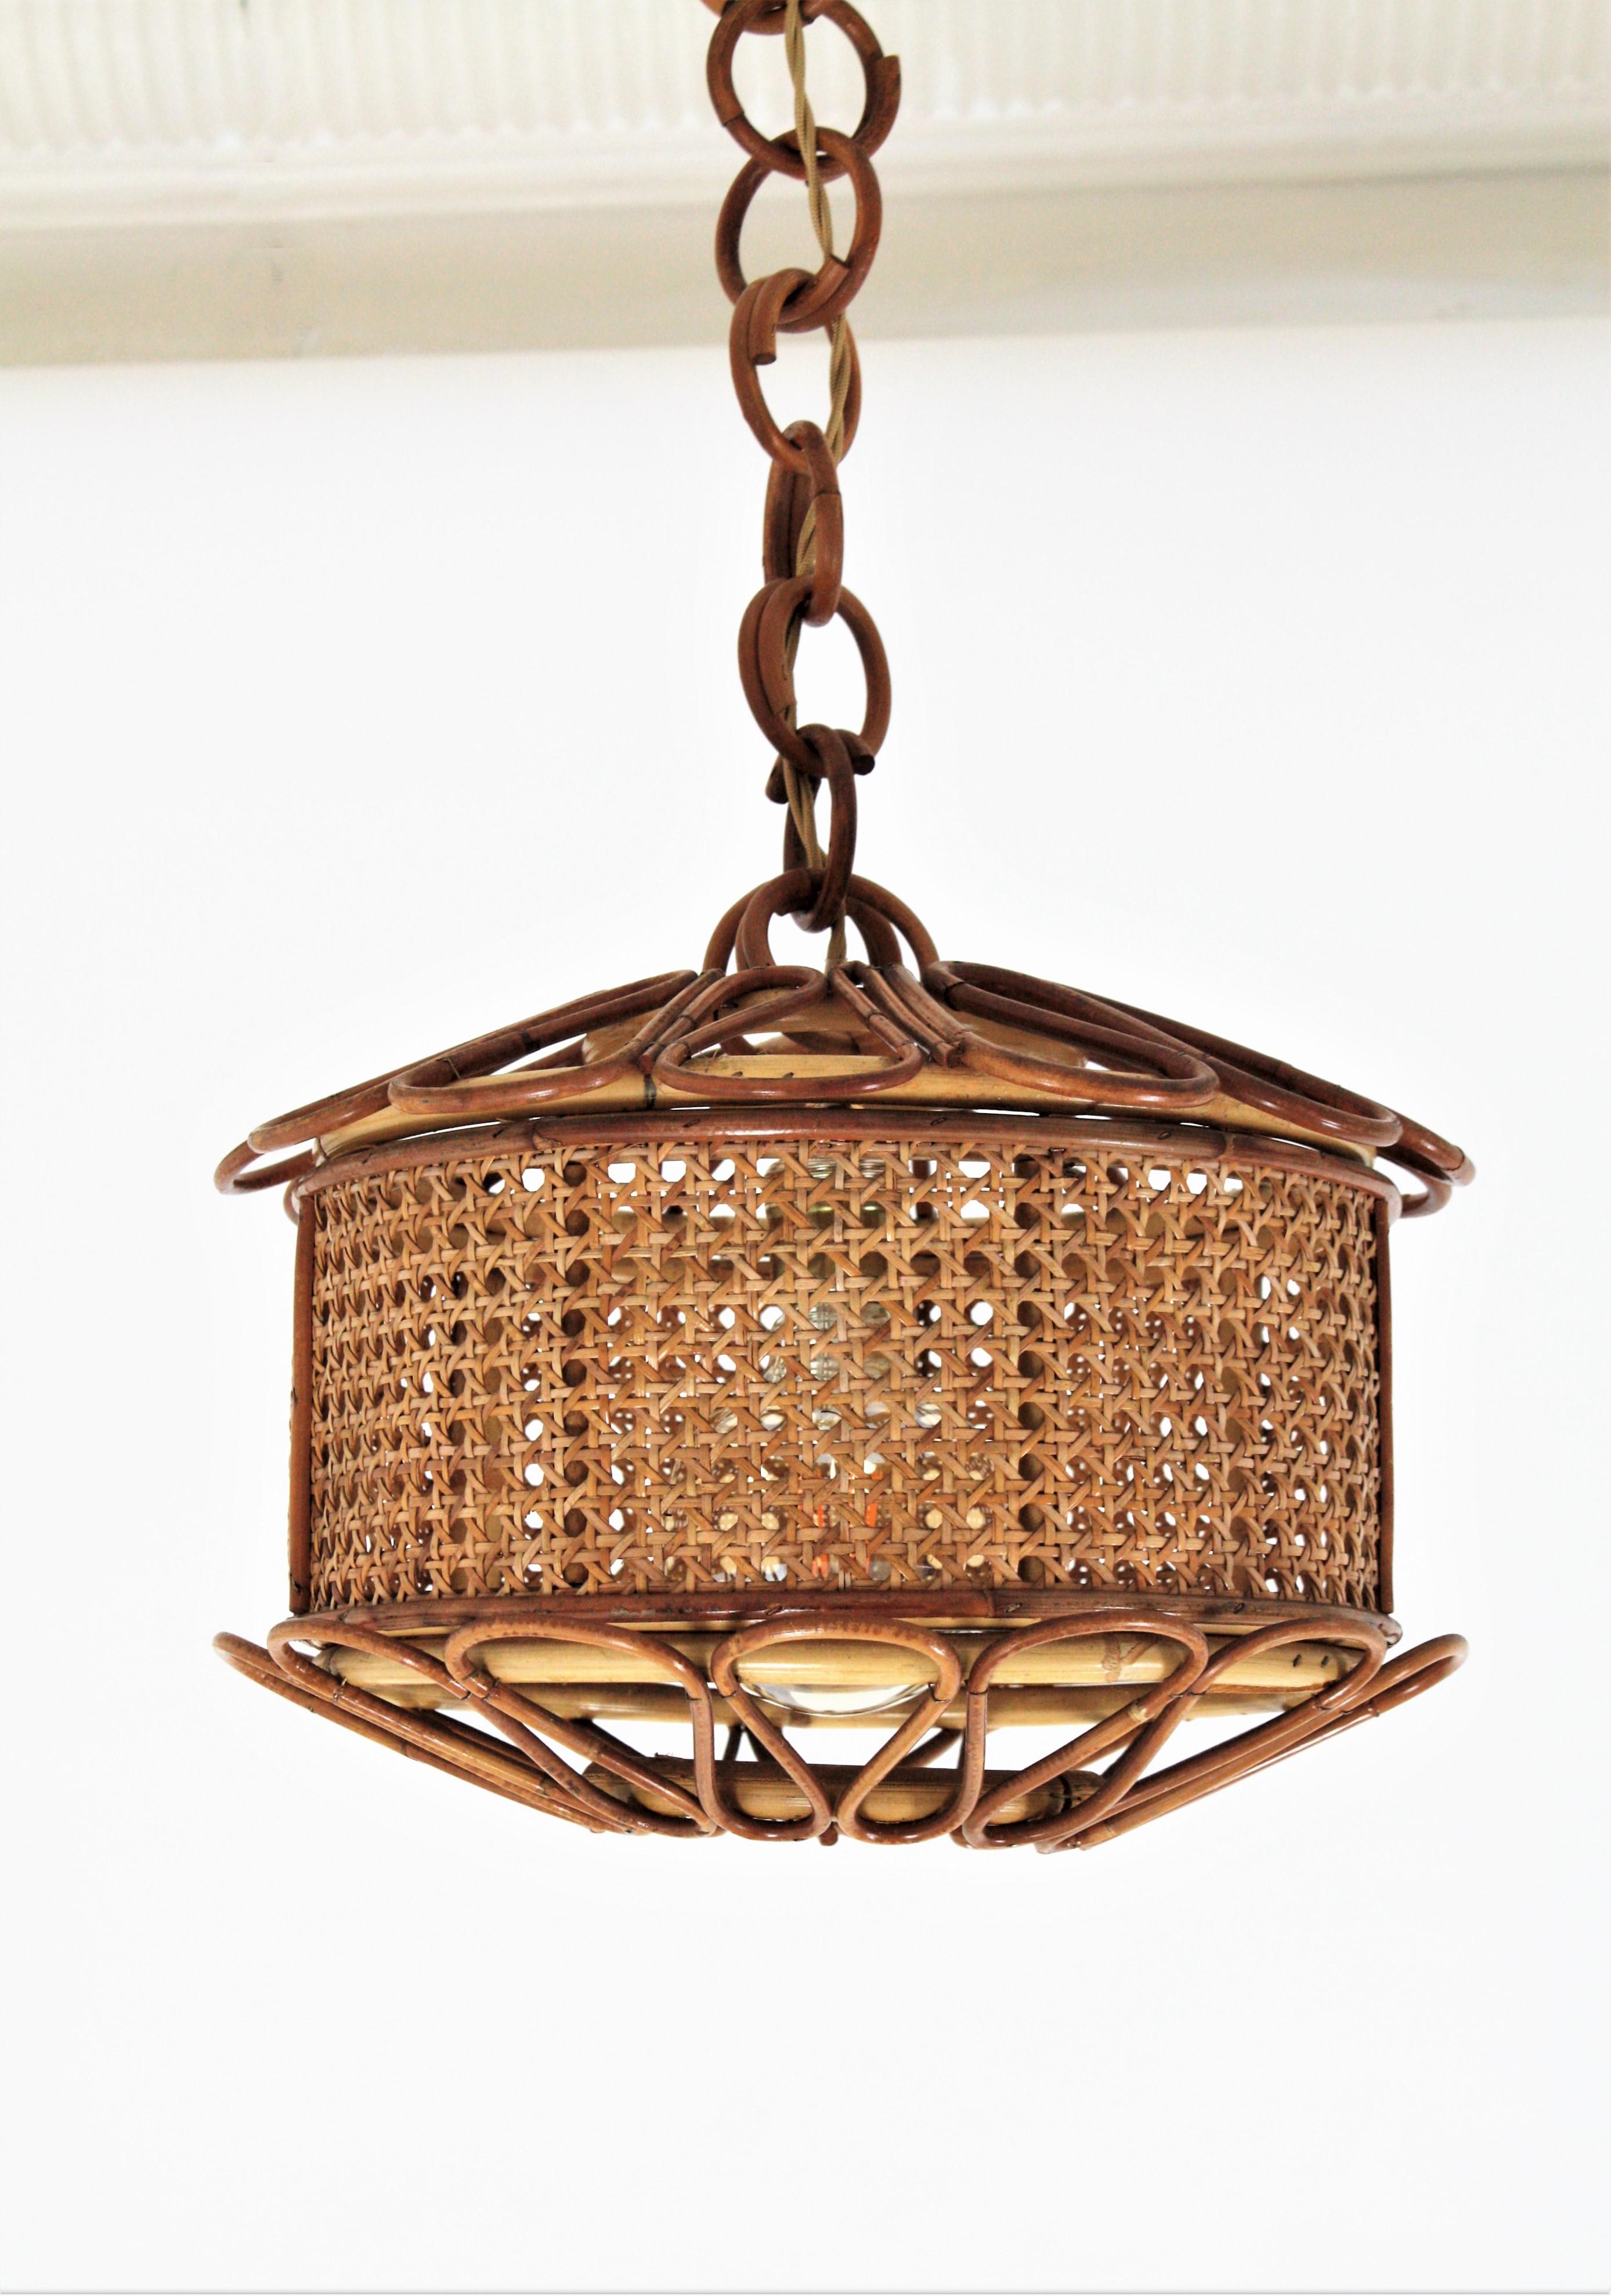 Cane Italian Modernist Wicker Wire and Rattan Pendant Hanging Light, 1950s